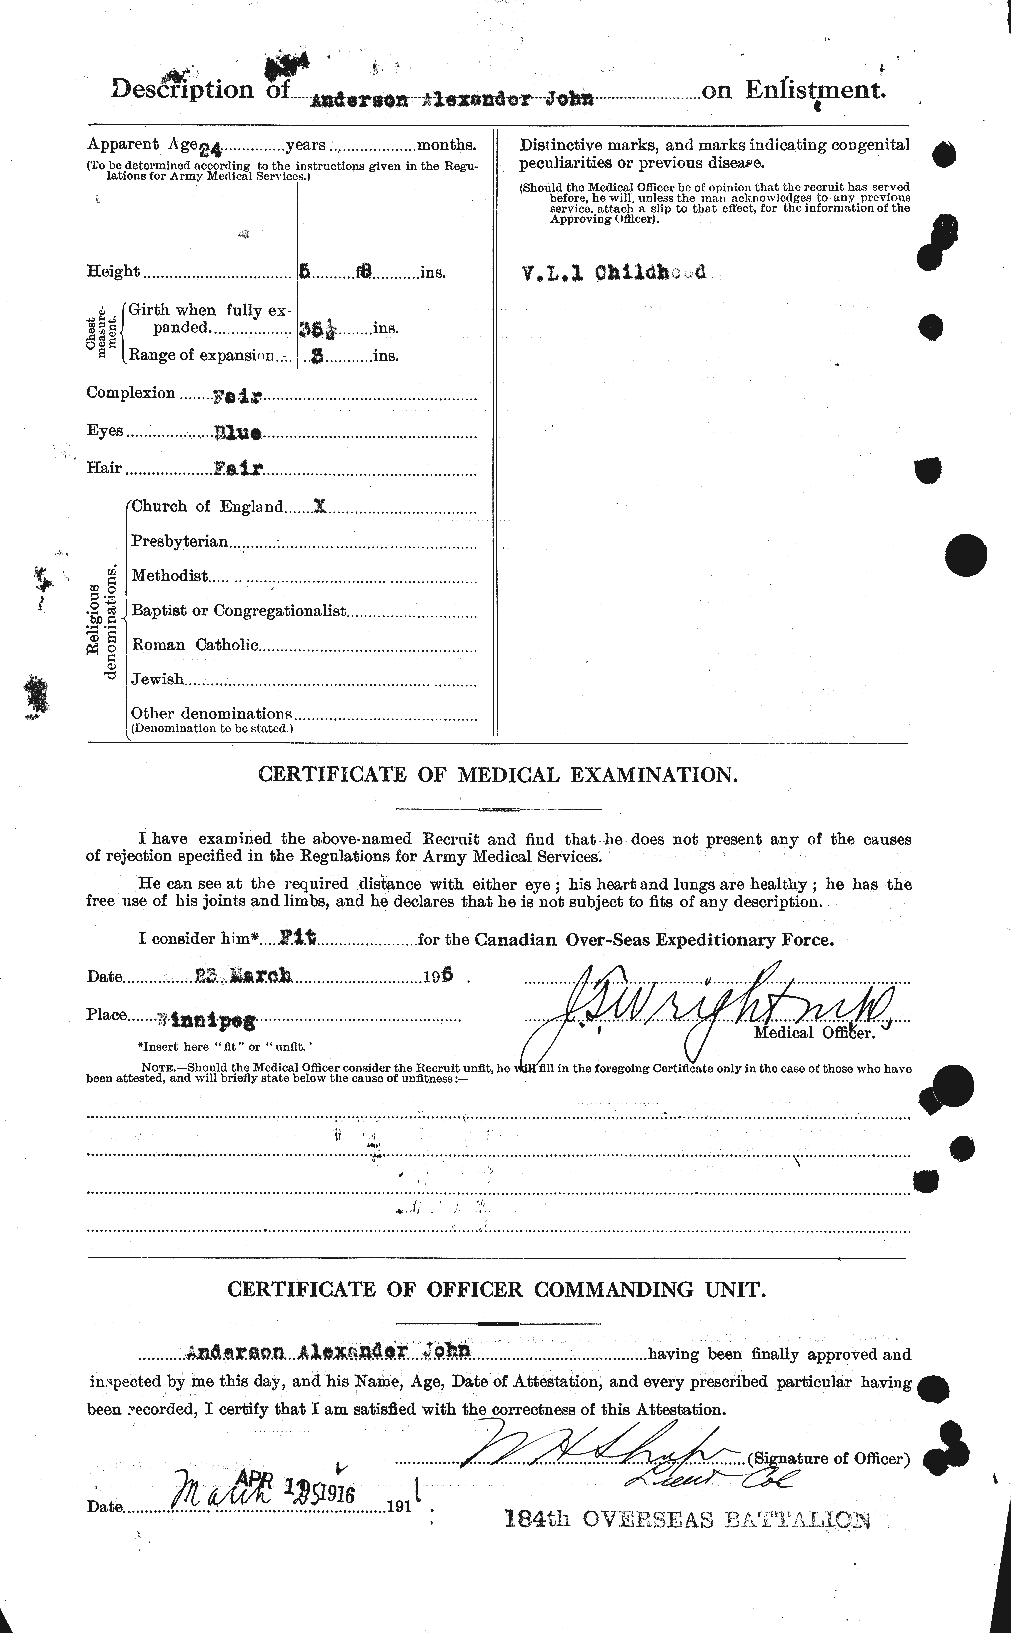 Personnel Records of the First World War - CEF 209484b